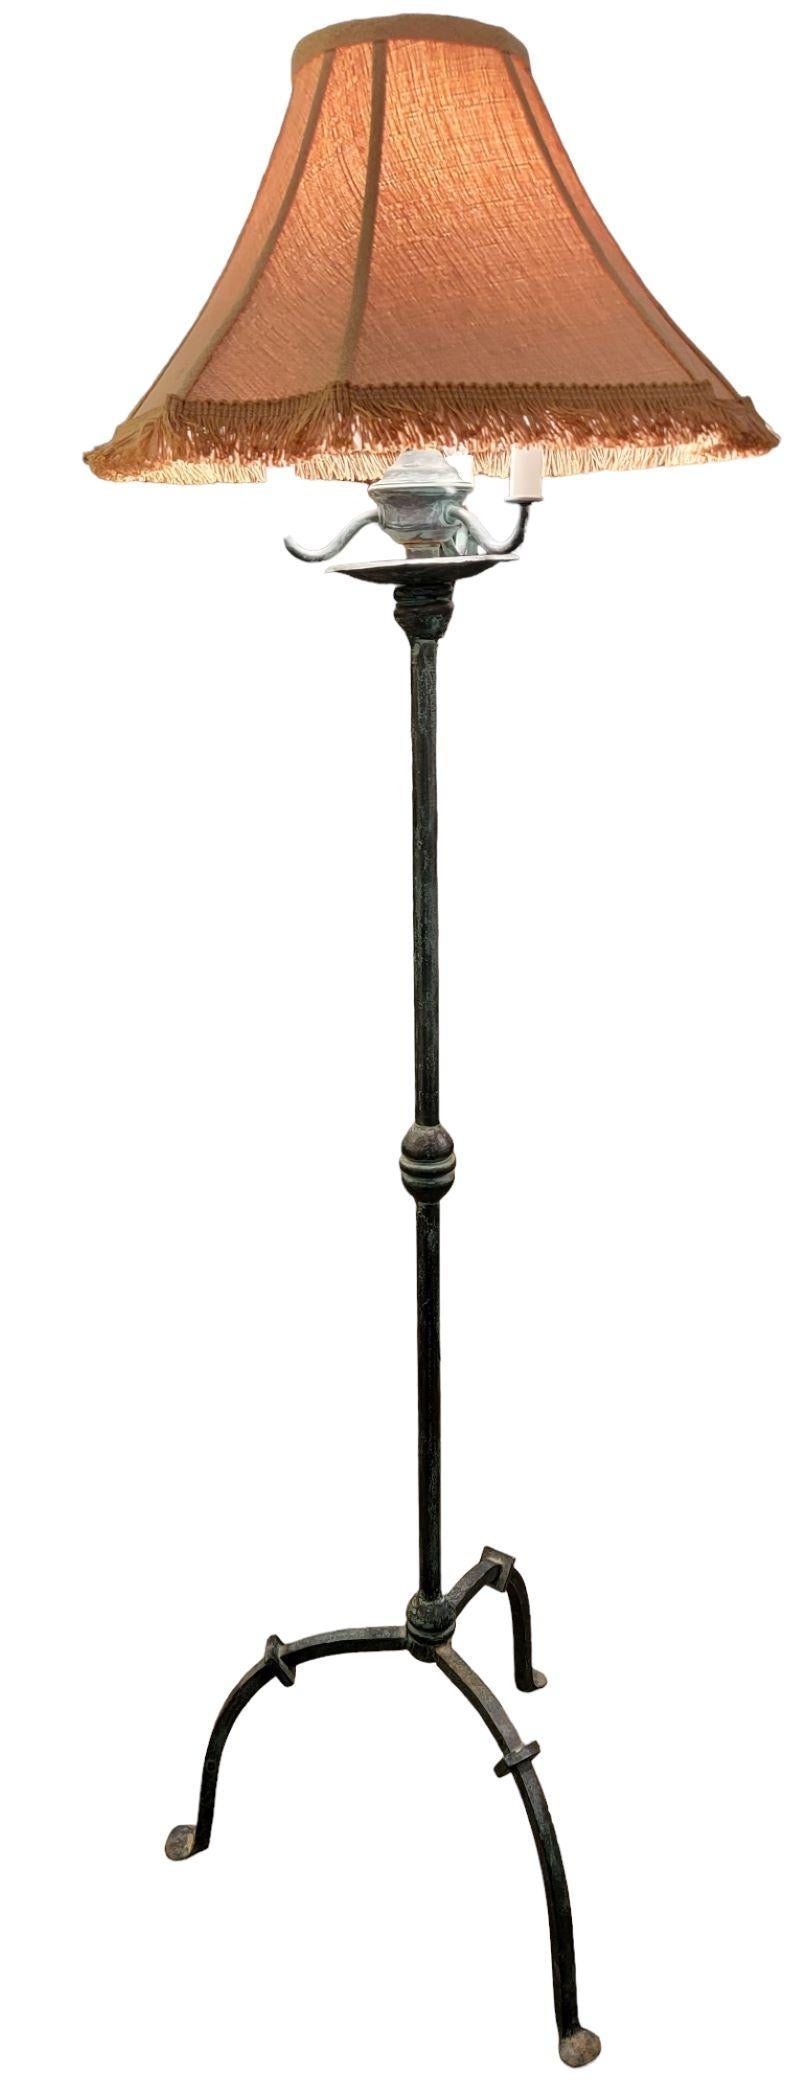 Paul Ferrante Iron Floor lamp with 2 ties of lighting. The Floor lamp has four lights underneath the Vintage fringed linen shade. There is a larger center light that sits at the top of the lamp with three smaller lights surrounding the main large